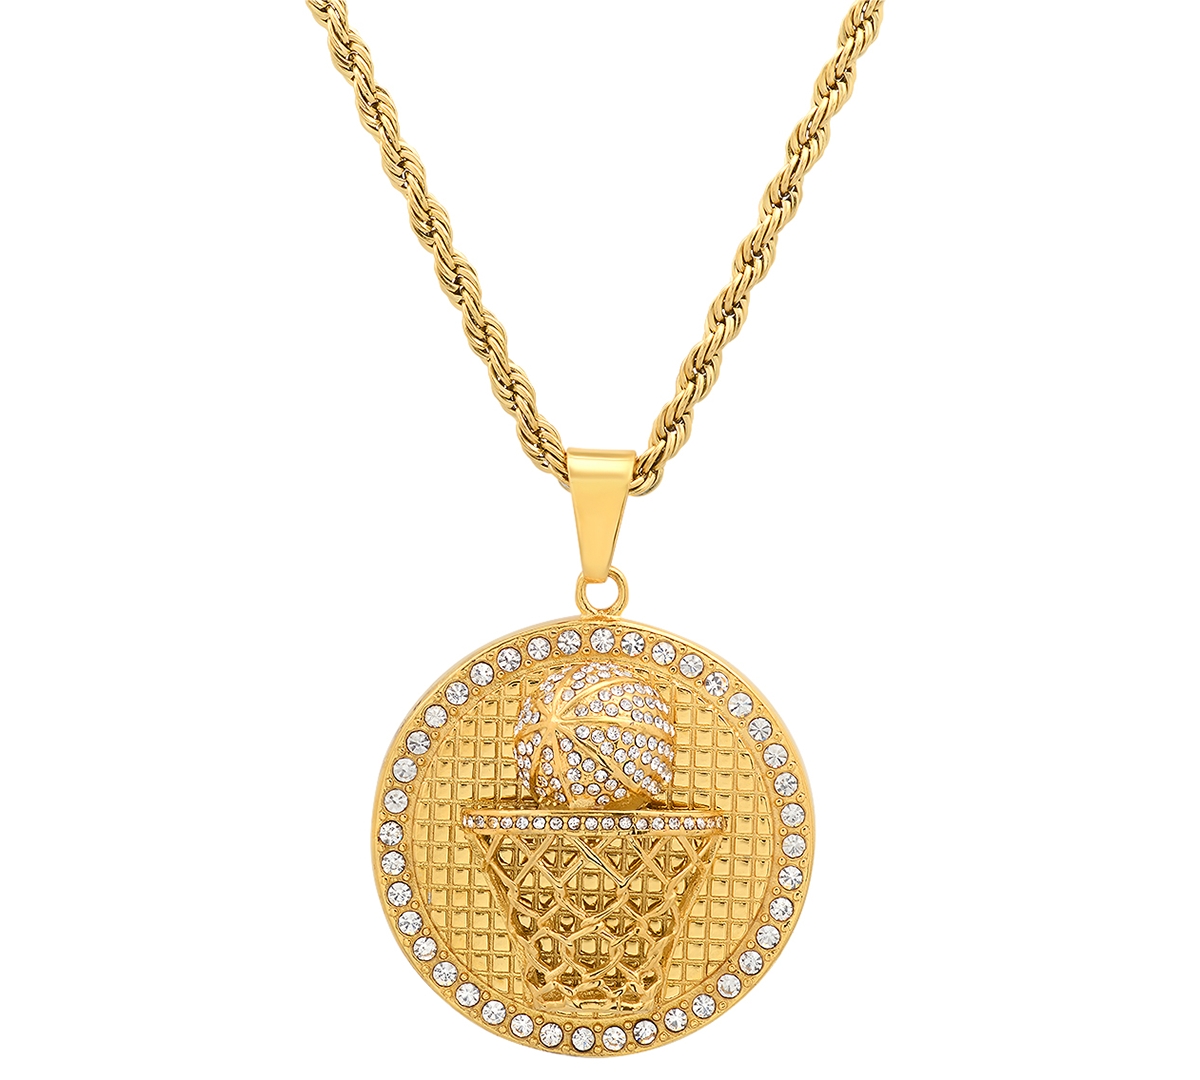 Steeltime Men's 18k Gold-plated Stainless Steel Simulated Diamond Basketball 24" Pendant Necklace